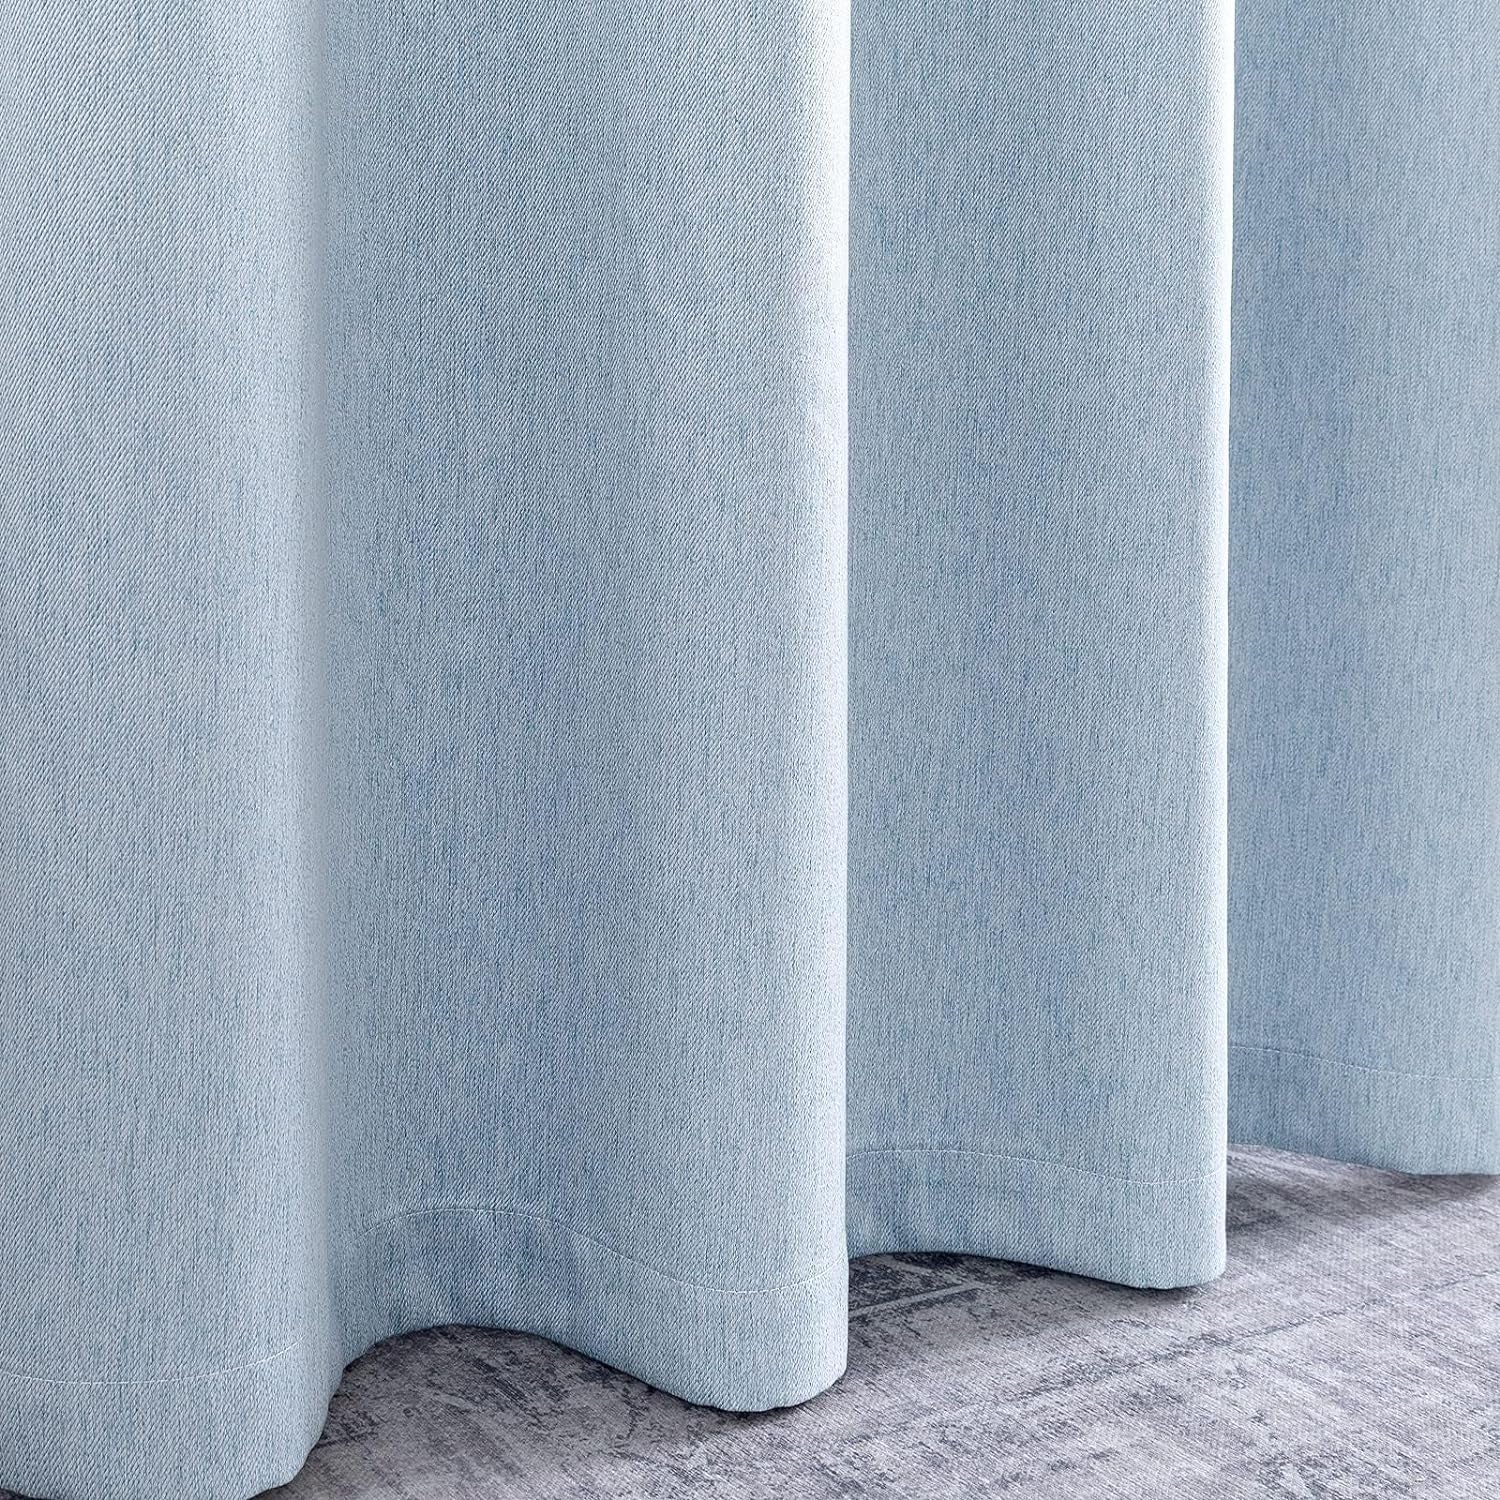 Jinchan Curtains for Bedroom Living Room 84 Inch Long Room Darkening Farmhouse Country Window Curtains Heathered Denim Blue Curtains Grommet Curtains Drapes 2 Panels  CKNY HOME FASHION   